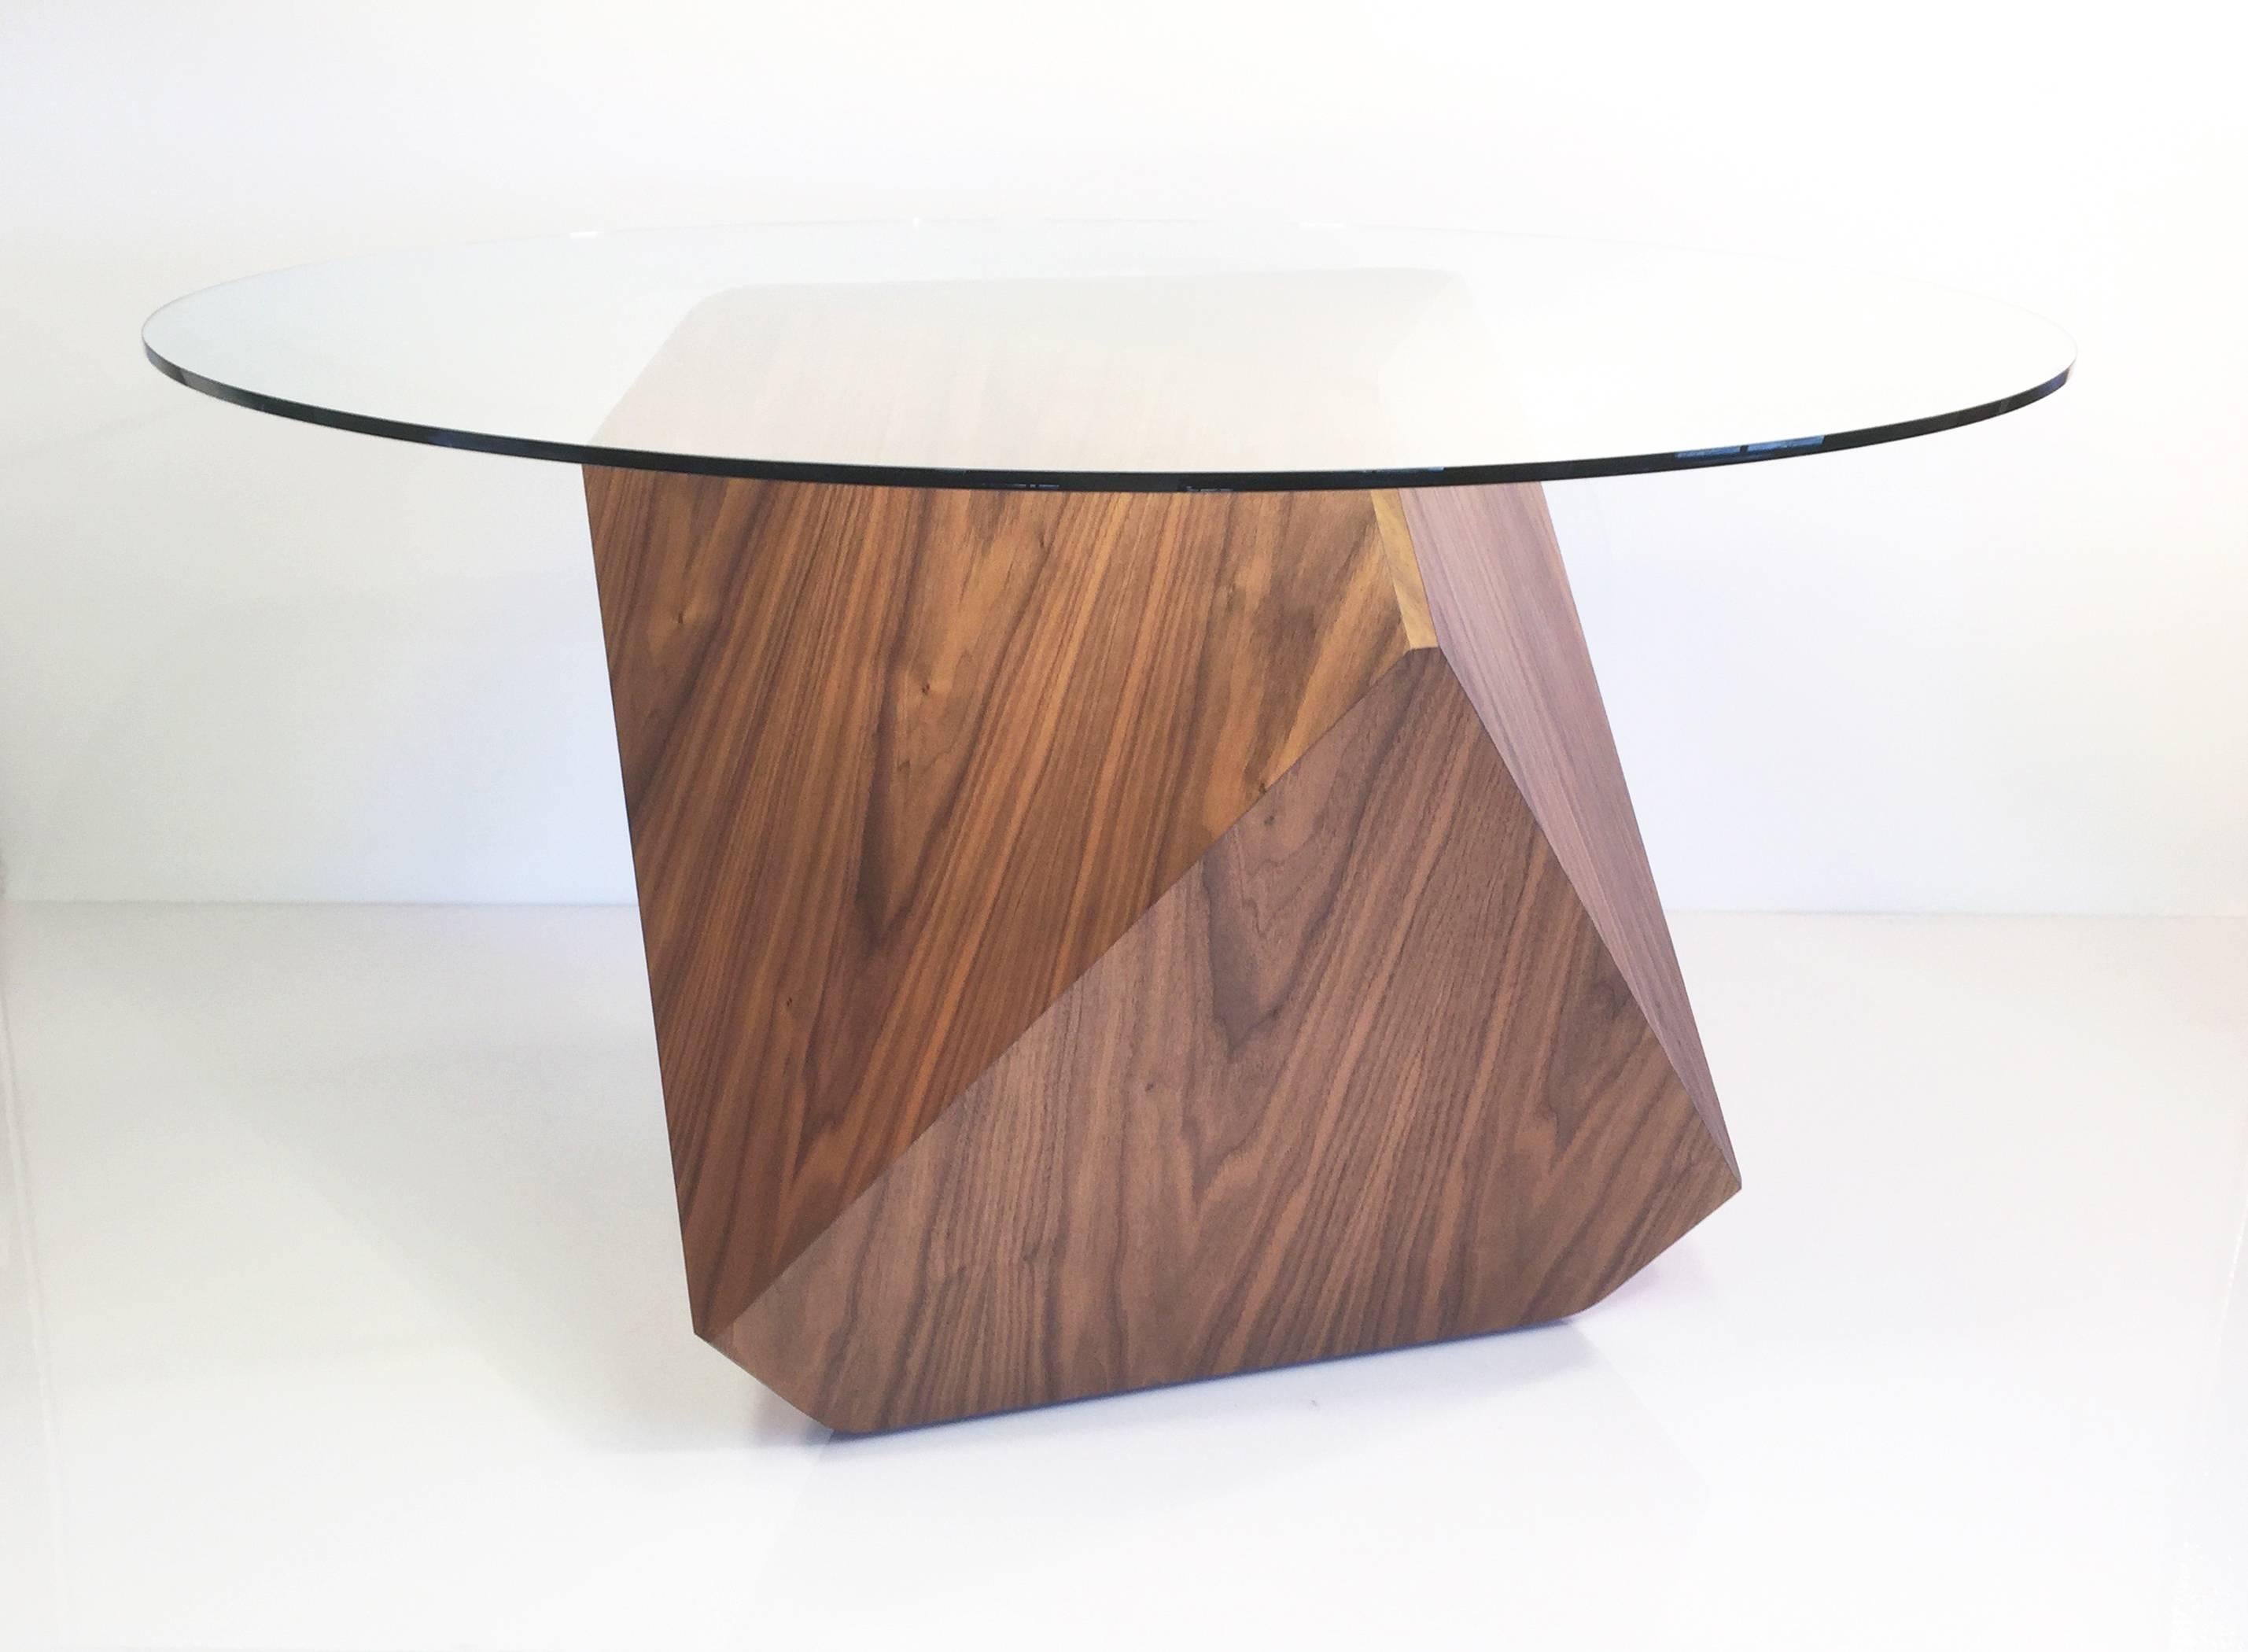 this is the dining or entry pedestal version of that crazy little gem that ignited the cubist craze back in 2000.
william has been making this larger version for almost as long and it has proven just as iconic.
shown in american walnut, with a 48